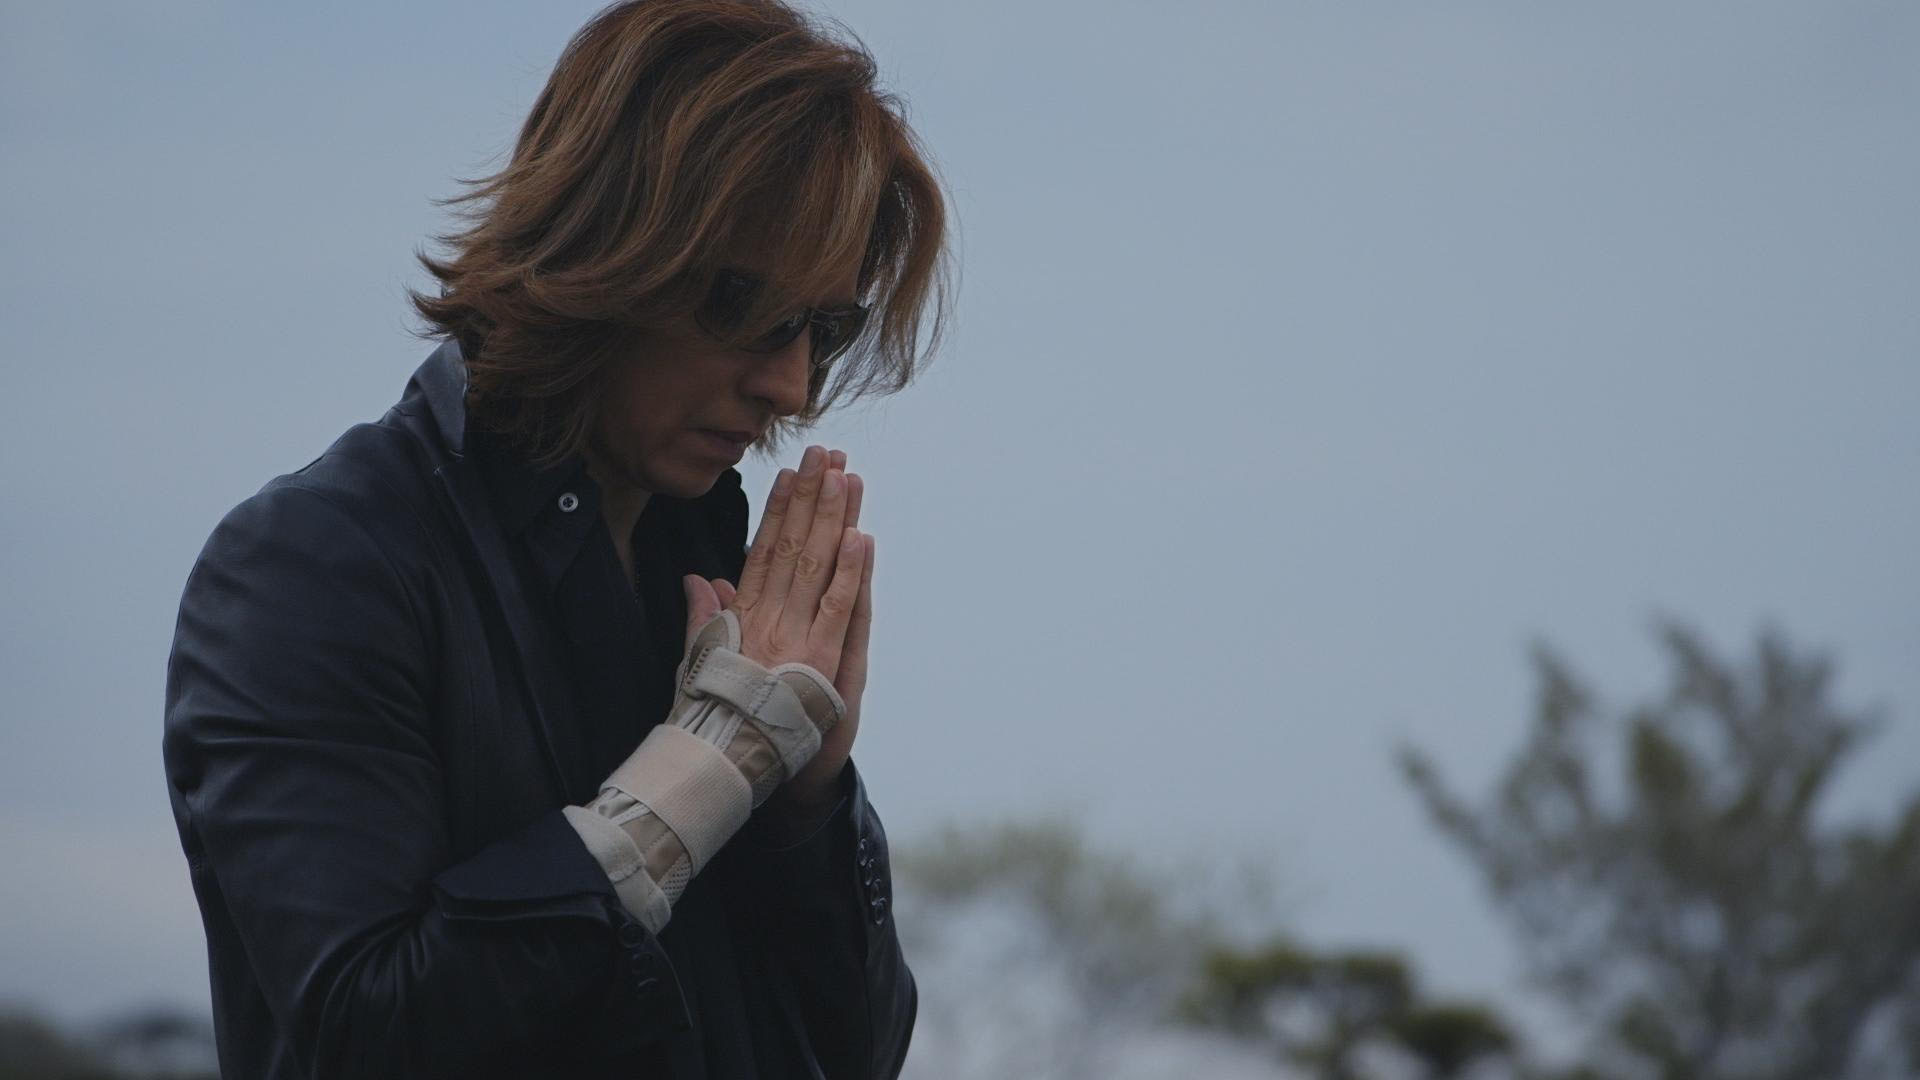 Busy schedule: The fast-paced life of X Japan's Yoshiki is looked at in a documentary by Stephen Kijak titled 'We Are X.' | © 2016 PASSION PICTURES, LTD.